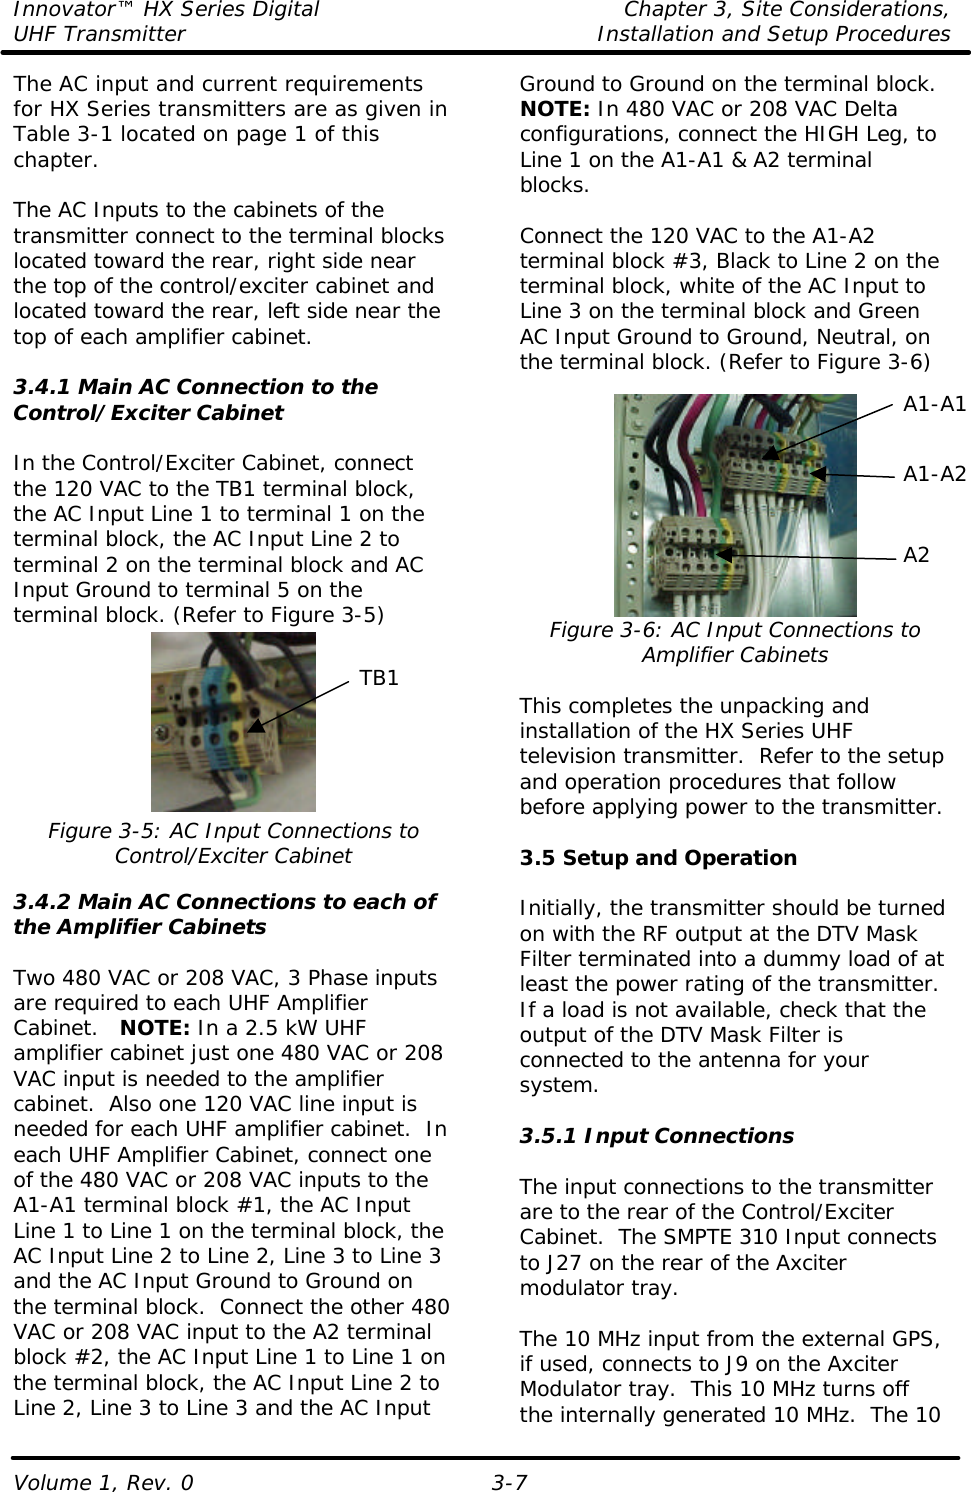 Innovator™ HX Series Digital    Chapter 3, Site Considerations, UHF Transmitter Installation and Setup Procedures Volume 1, Rev. 0  3-7 The AC input and current requirements for HX Series transmitters are as given in Table 3-1 located on page 1 of this chapter.   The AC Inputs to the cabinets of the transmitter connect to the terminal blocks located toward the rear, right side near the top of the control/exciter cabinet and located toward the rear, left side near the top of each amplifier cabinet.  3.4.1 Main AC Connection to the Control/Exciter Cabinet  In the Control/Exciter Cabinet, connect the 120 VAC to the TB1 terminal block, the AC Input Line 1 to terminal 1 on the terminal block, the AC Input Line 2 to terminal 2 on the terminal block and AC Input Ground to terminal 5 on the terminal block. (Refer to Figure 3-5)  Figure 3-5: AC Input Connections to Control/Exciter Cabinet  3.4.2 Main AC Connections to each of the Amplifier Cabinets  Two 480 VAC or 208 VAC, 3 Phase inputs are required to each UHF Amplifier Cabinet.   NOTE: In a 2.5 kW UHF amplifier cabinet just one 480 VAC or 208 VAC input is needed to the amplifier cabinet.  Also one 120 VAC line input is needed for each UHF amplifier cabinet.  In each UHF Amplifier Cabinet, connect one of the 480 VAC or 208 VAC inputs to the A1-A1 terminal block #1, the AC Input Line 1 to Line 1 on the terminal block, the AC Input Line 2 to Line 2, Line 3 to Line 3 and the AC Input Ground to Ground on the terminal block.  Connect the other 480 VAC or 208 VAC input to the A2 terminal block #2, the AC Input Line 1 to Line 1 on the terminal block, the AC Input Line 2 to Line 2, Line 3 to Line 3 and the AC Input Ground to Ground on the terminal block.  NOTE: In 480 VAC or 208 VAC Delta configurations, connect the HIGH Leg, to Line 1 on the A1-A1 &amp; A2 terminal blocks.  Connect the 120 VAC to the A1-A2 terminal block #3, Black to Line 2 on the terminal block, white of the AC Input to Line 3 on the terminal block and Green AC Input Ground to Ground, Neutral, on the terminal block. (Refer to Figure 3-6)   Figure 3-6: AC Input Connections to Amplifier Cabinets  This completes the unpacking and installation of the HX Series UHF television transmitter.  Refer to the setup and operation procedures that follow before applying power to the transmitter.  3.5 Setup and Operation  Initially, the transmitter should be turned on with the RF output at the DTV Mask Filter terminated into a dummy load of at least the power rating of the transmitter. If a load is not available, check that the output of the DTV Mask Filter is connected to the antenna for your system.  3.5.1 Input Connections  The input connections to the transmitter are to the rear of the Control/Exciter Cabinet.  The SMPTE 310 Input connects to J27 on the rear of the Axciter modulator tray.  The 10 MHz input from the external GPS, if used, connects to J9 on the Axciter Modulator tray.  This 10 MHz turns off the internally generated 10 MHz.  The 10 A1-A2 A2 TB1 A1-A1 